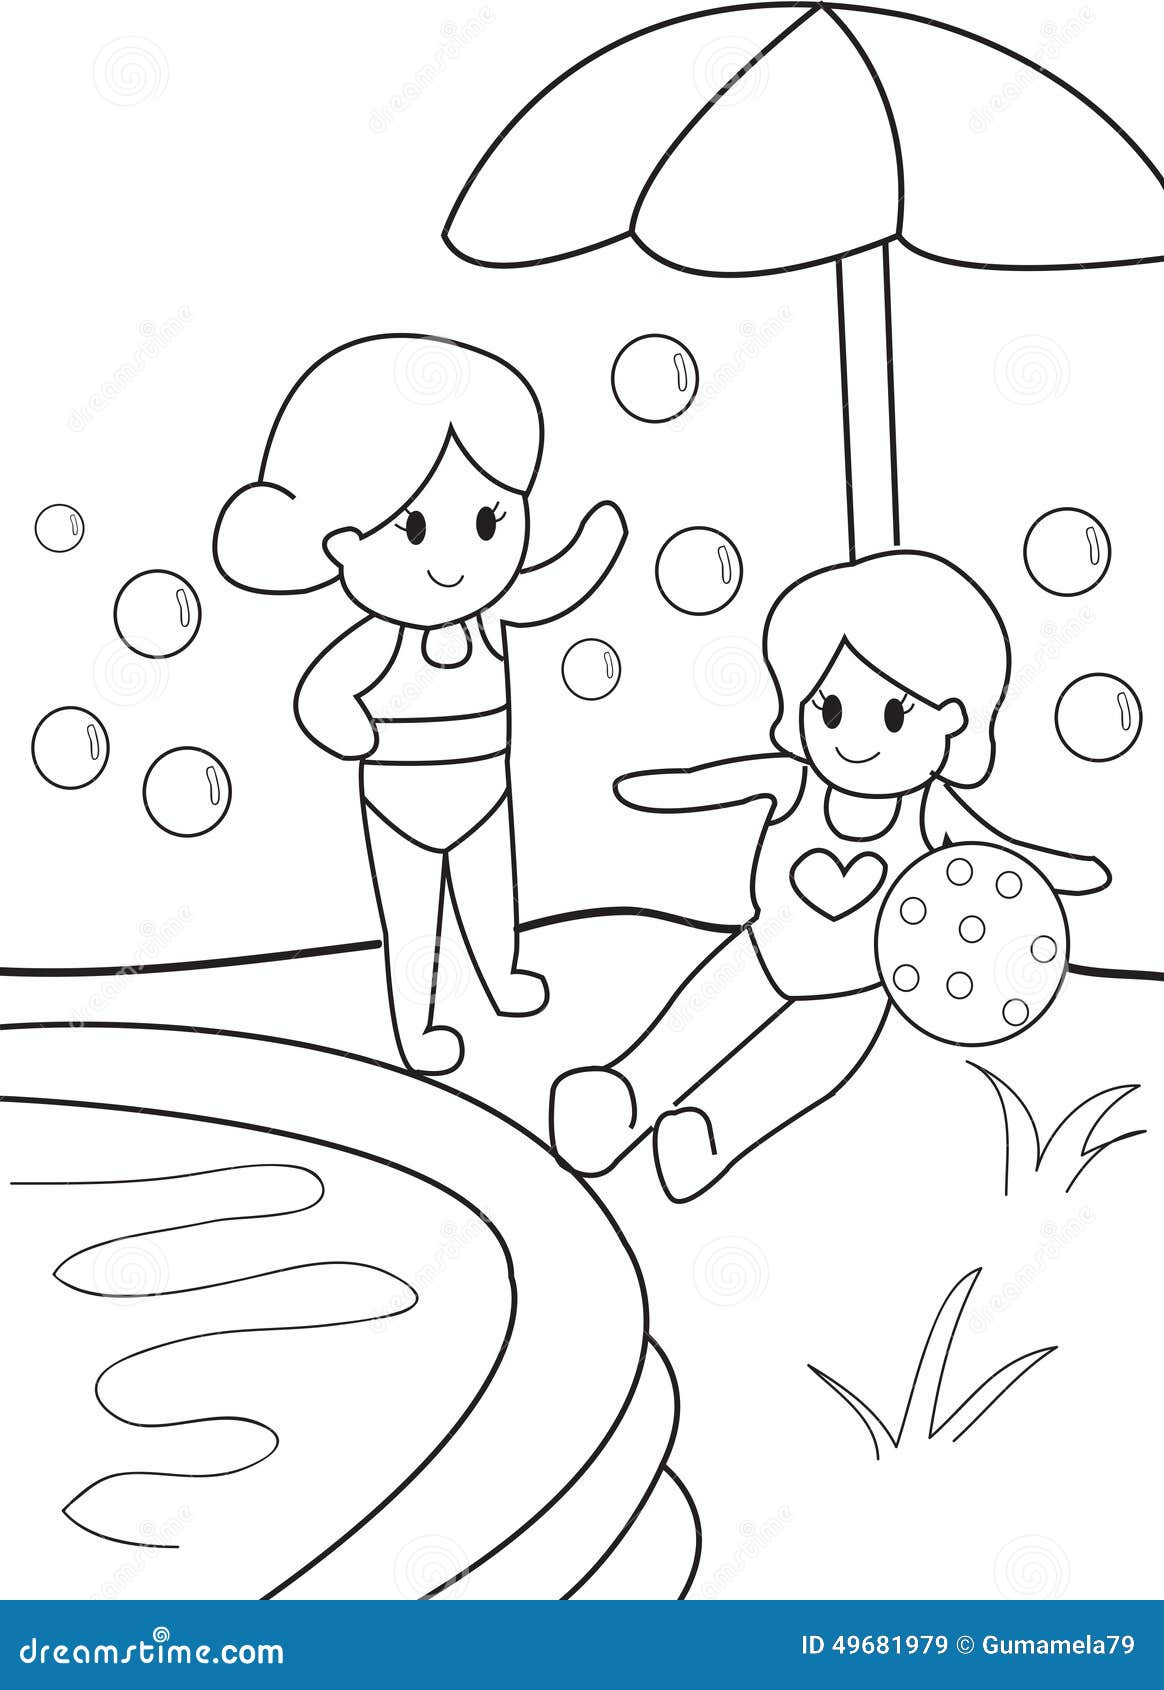 Girls by the pool kid coloring page stock illustration